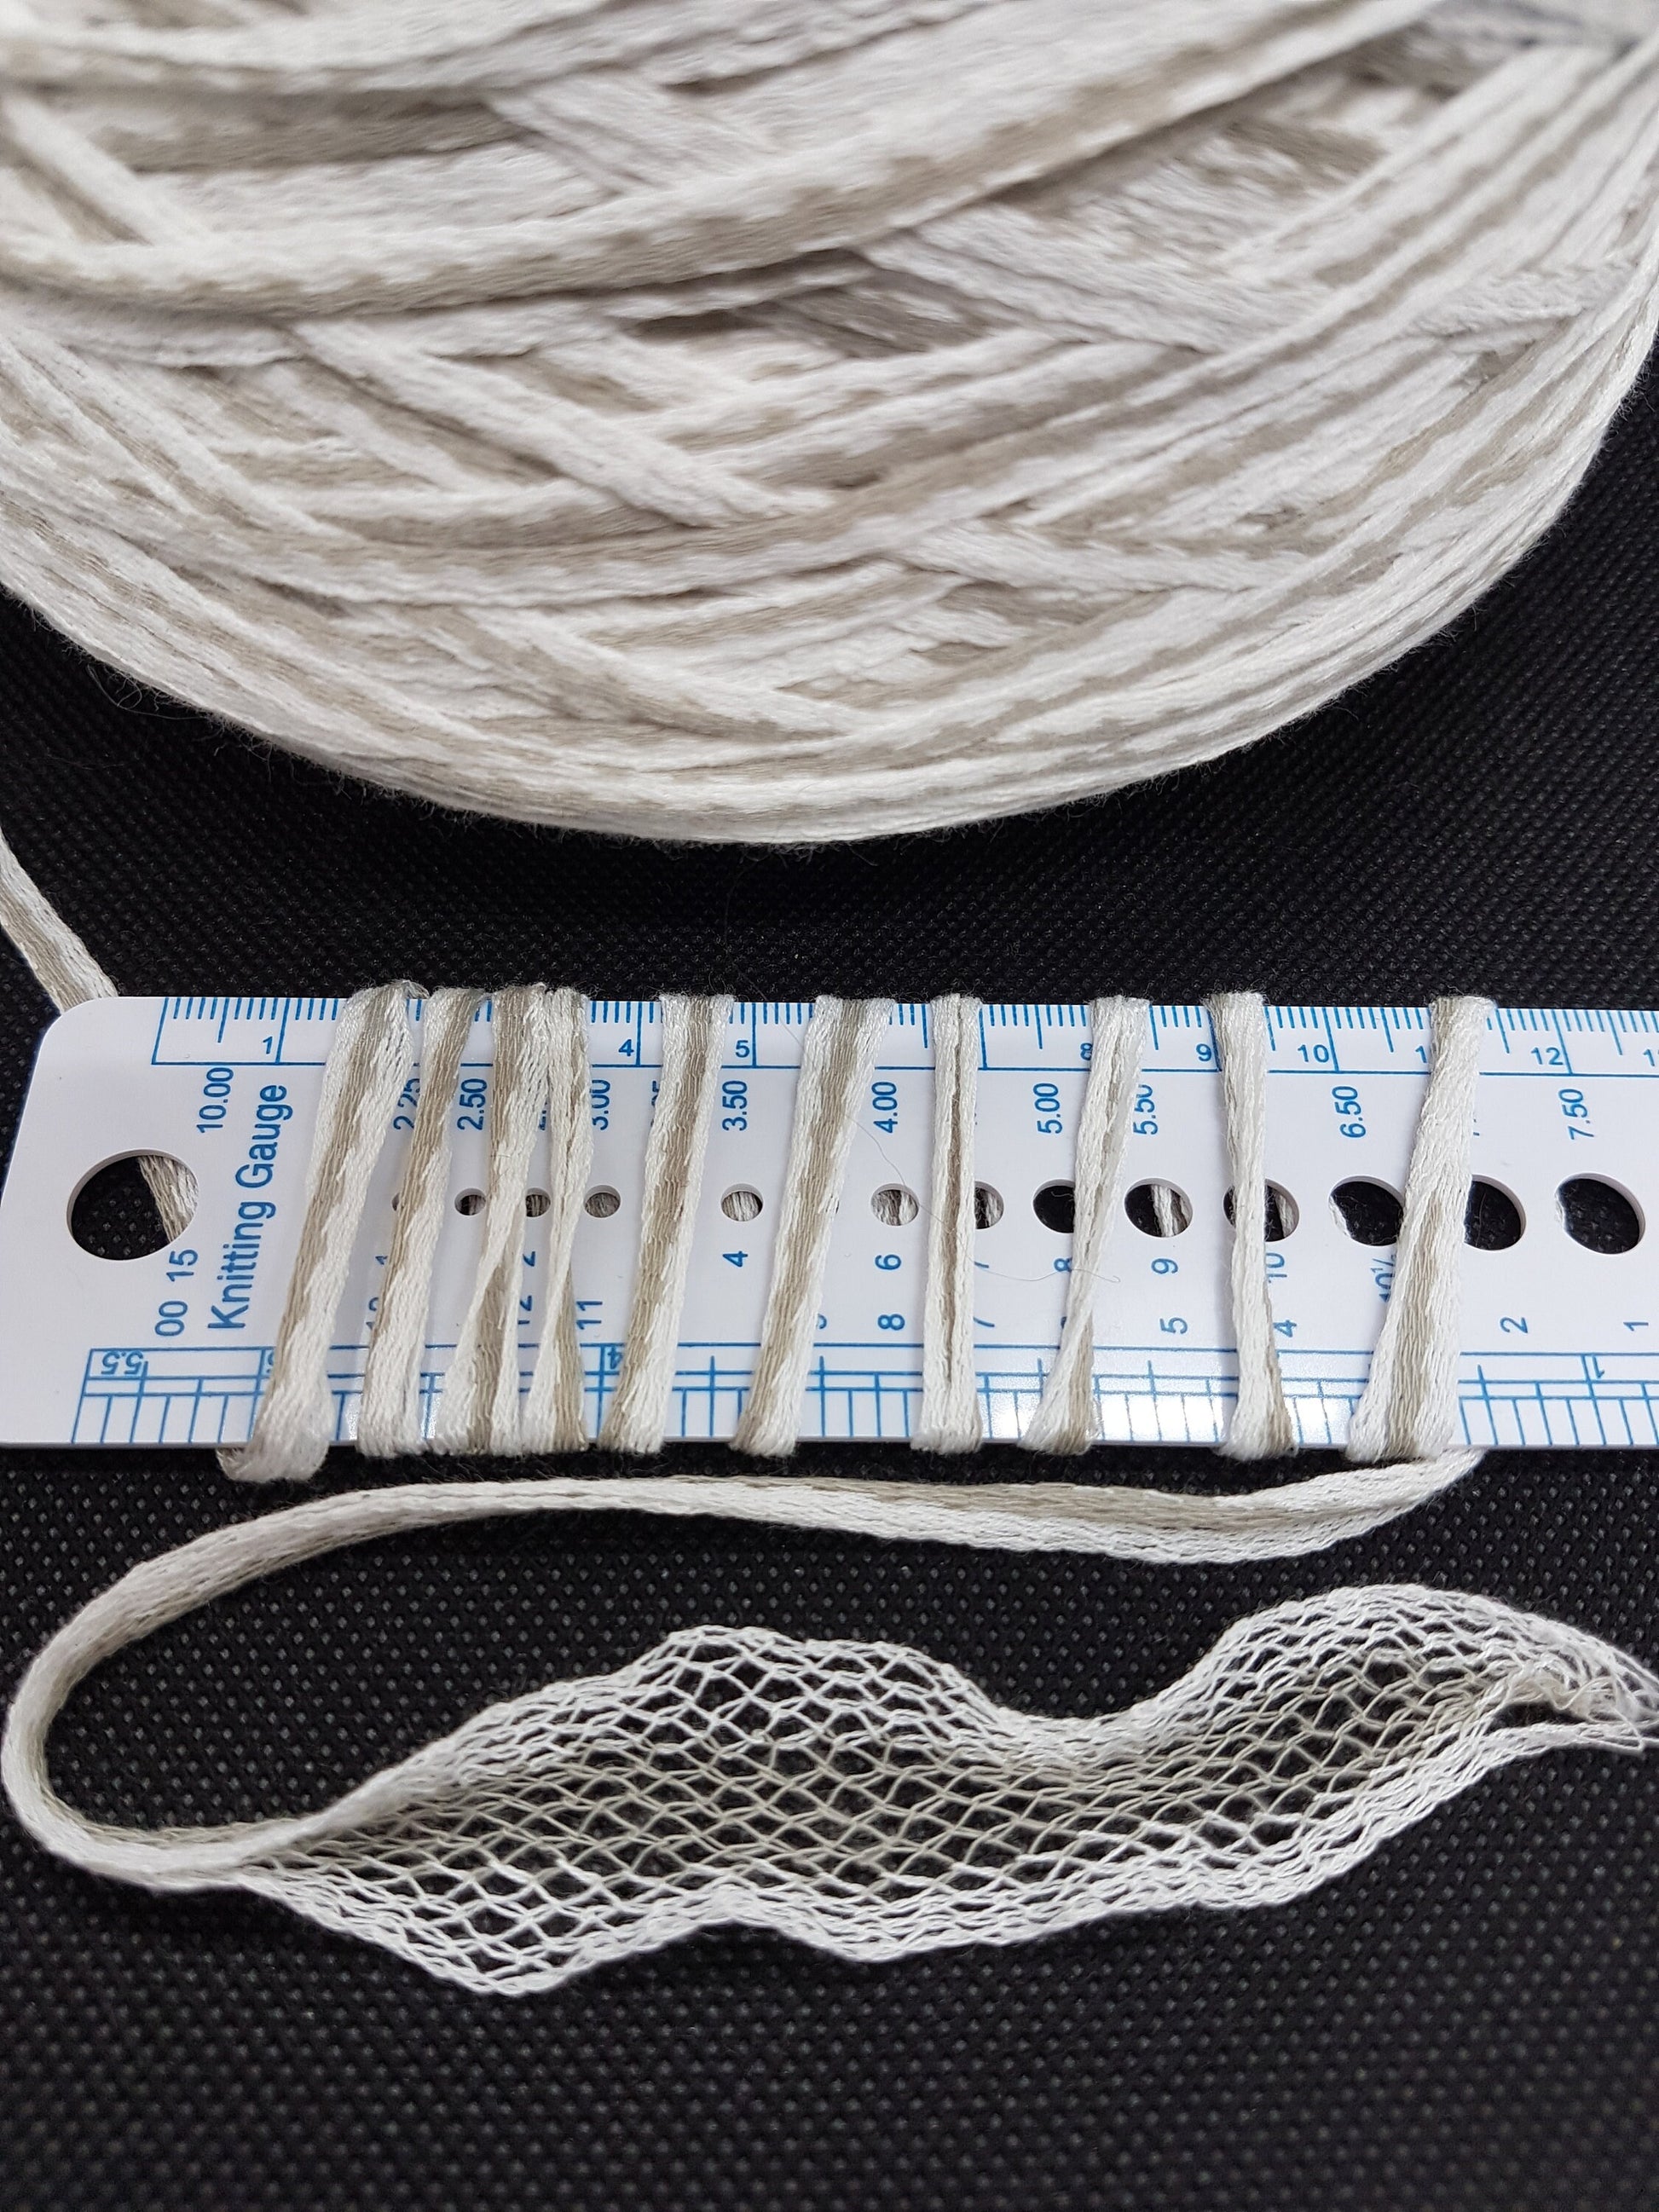 730g Soft Cotton Italian Tape Bulky Knitting Yarn color White&Grey in cone N.77